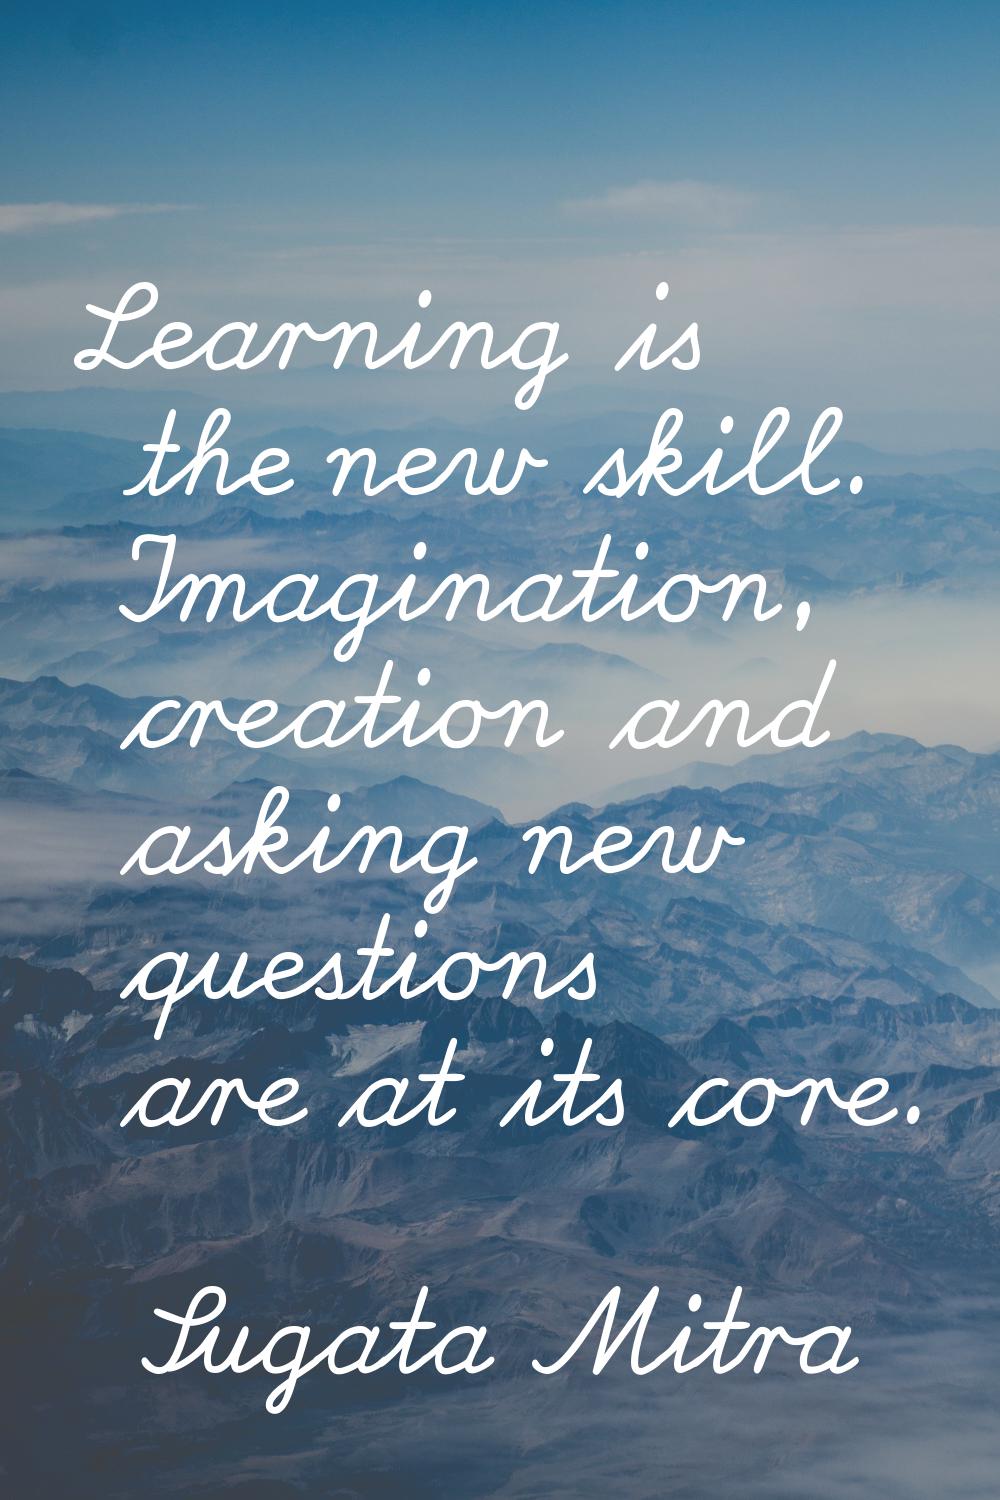 Learning is the new skill. Imagination, creation and asking new questions are at its core.